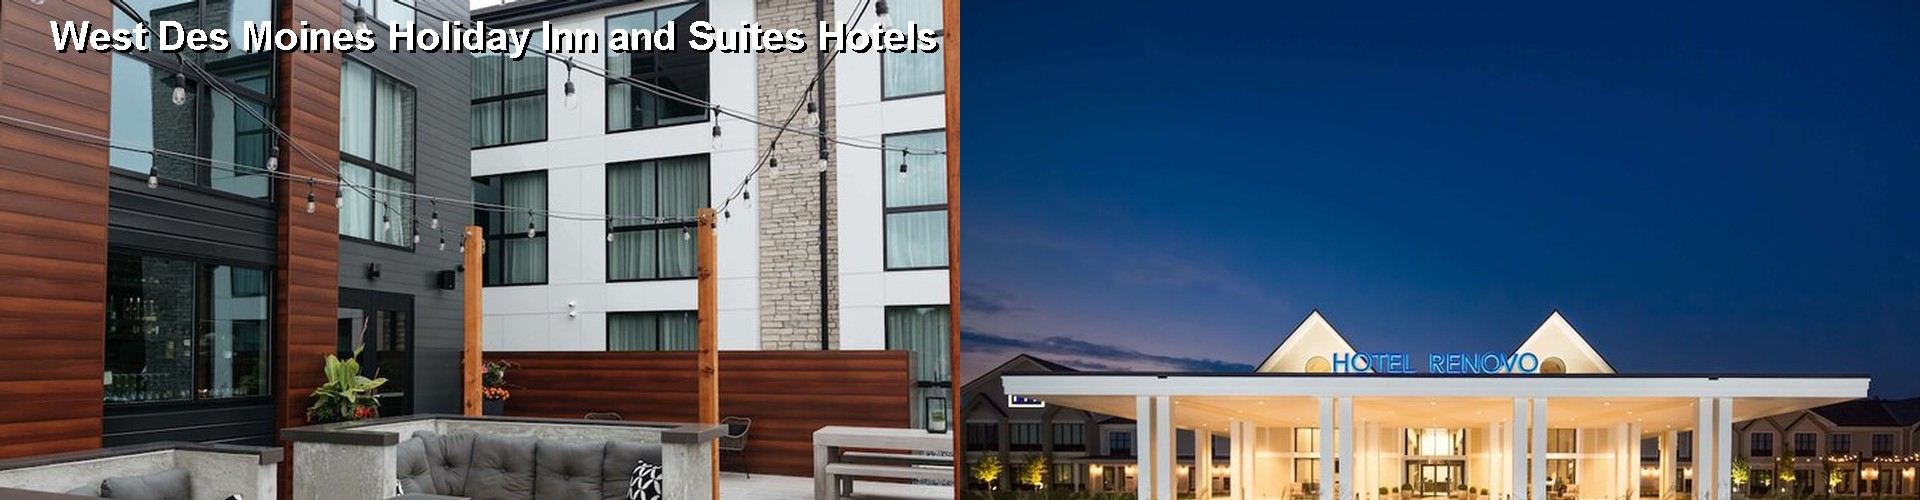 5 Best Hotels near West Des Moines Holiday Inn and Suites